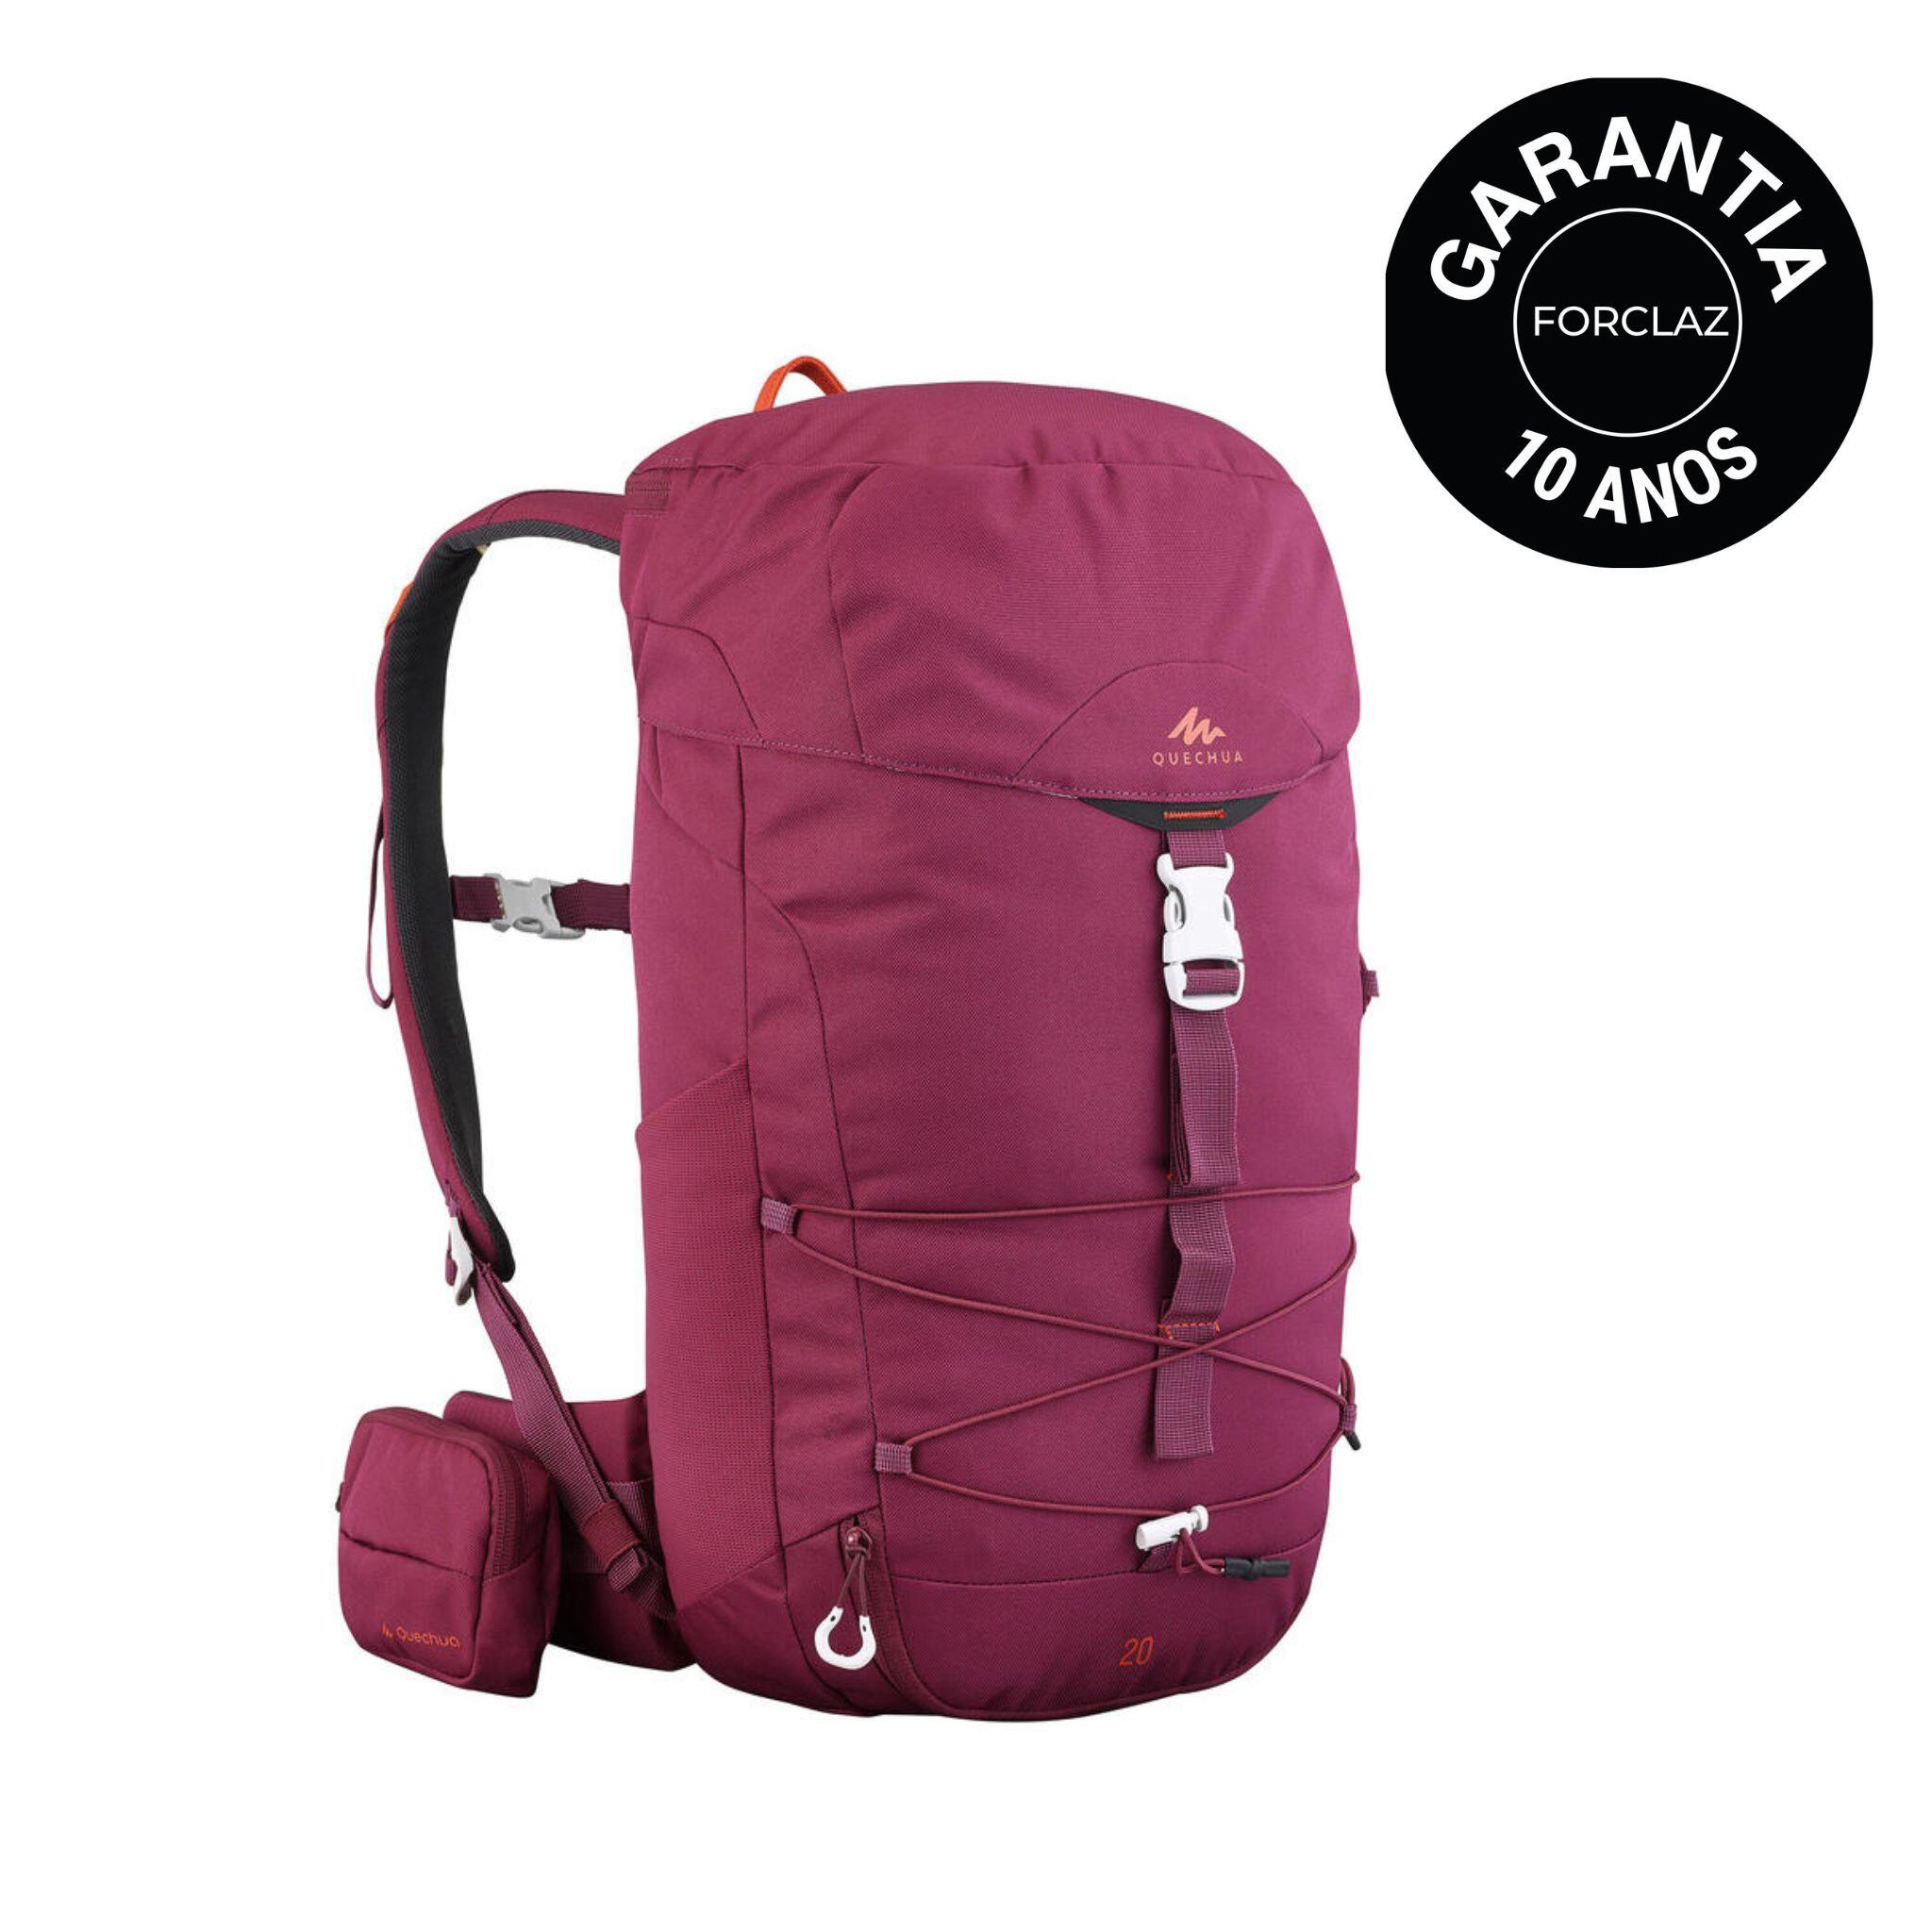 Mountain hiking backpack 20L - MH100 1/15